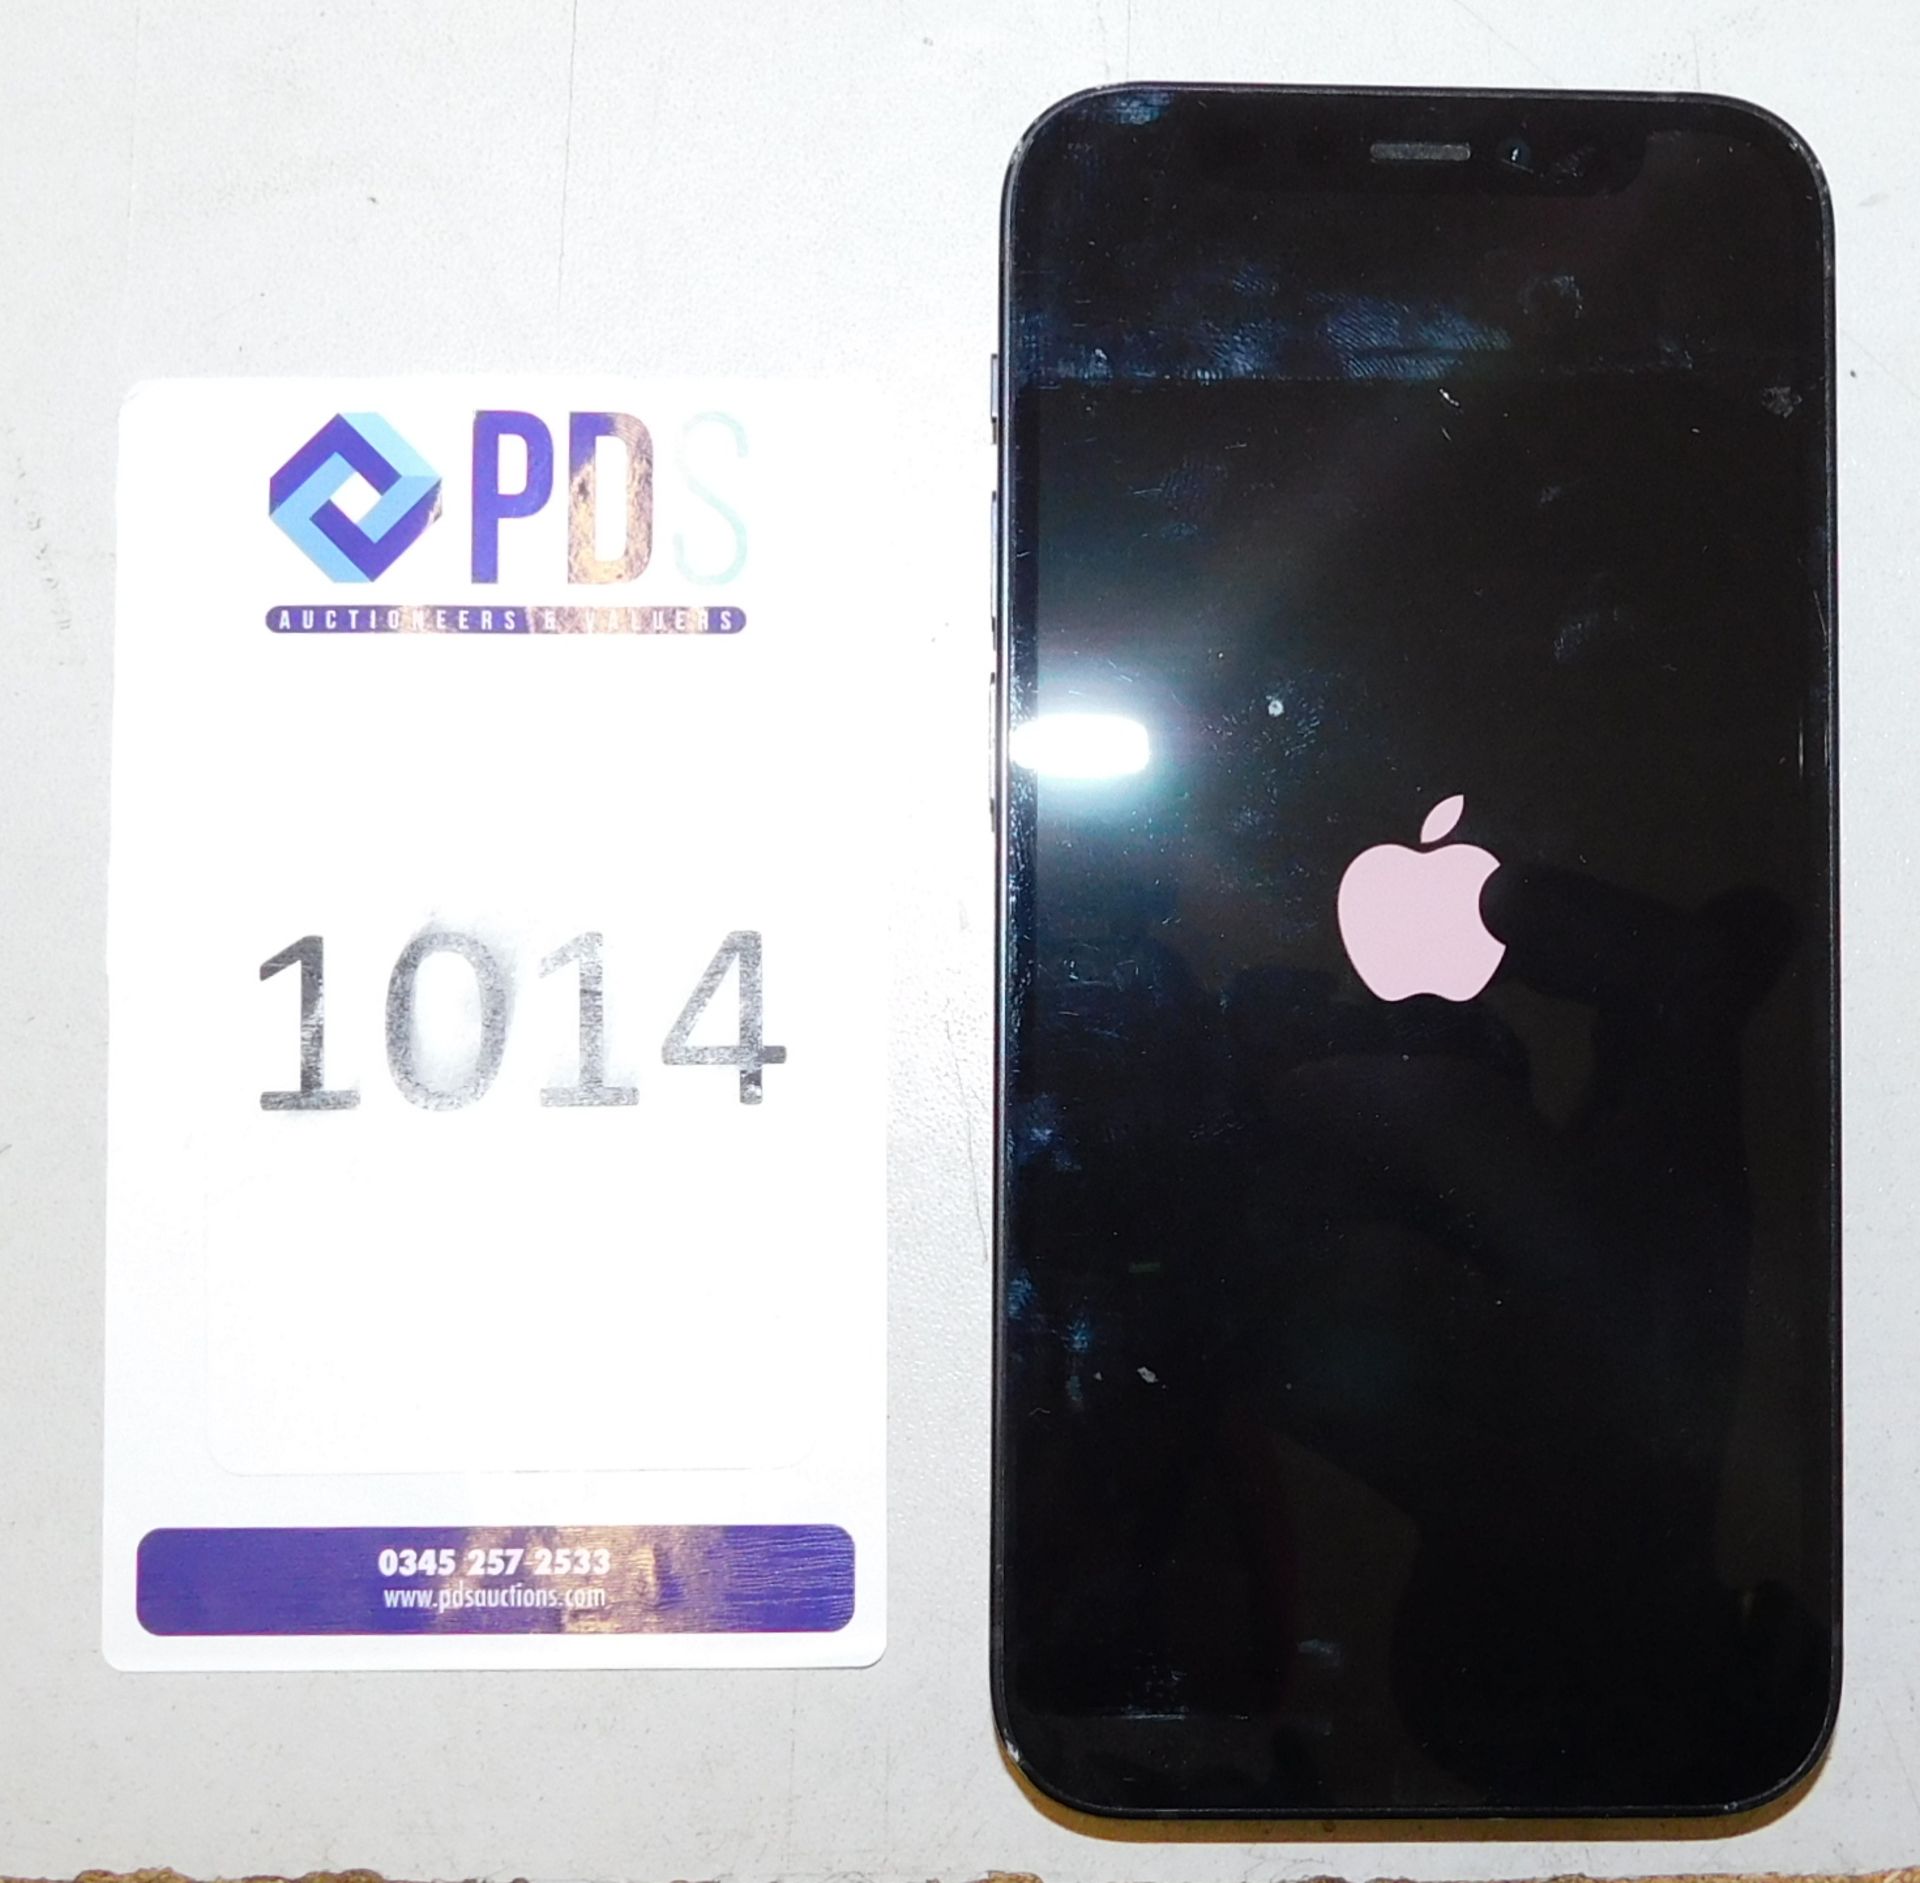 Apple iPhone 12 Mini, 256 GB Capacity, Serial Number F4GDL0NK0GQ2 (Location Stockport. Please